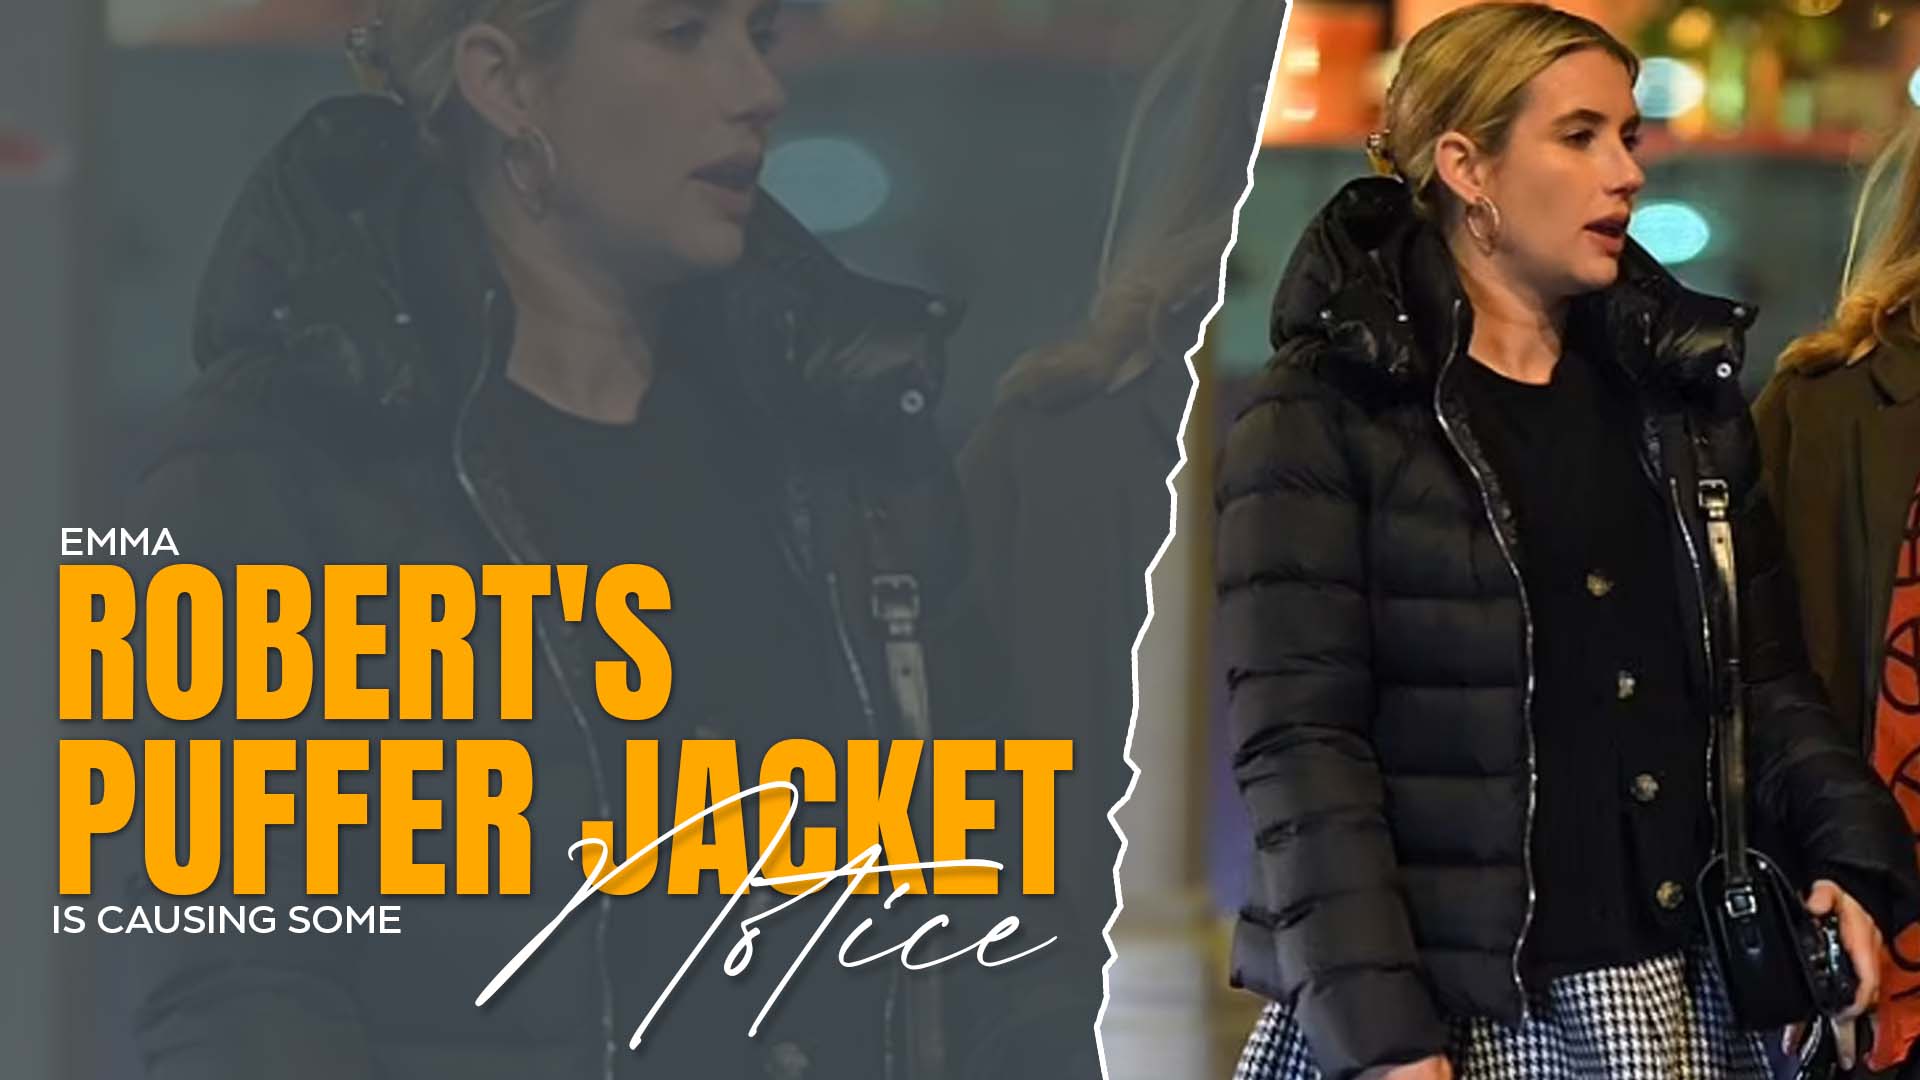 Emma Robert's Puffer Jacket Is Causing Some Notice